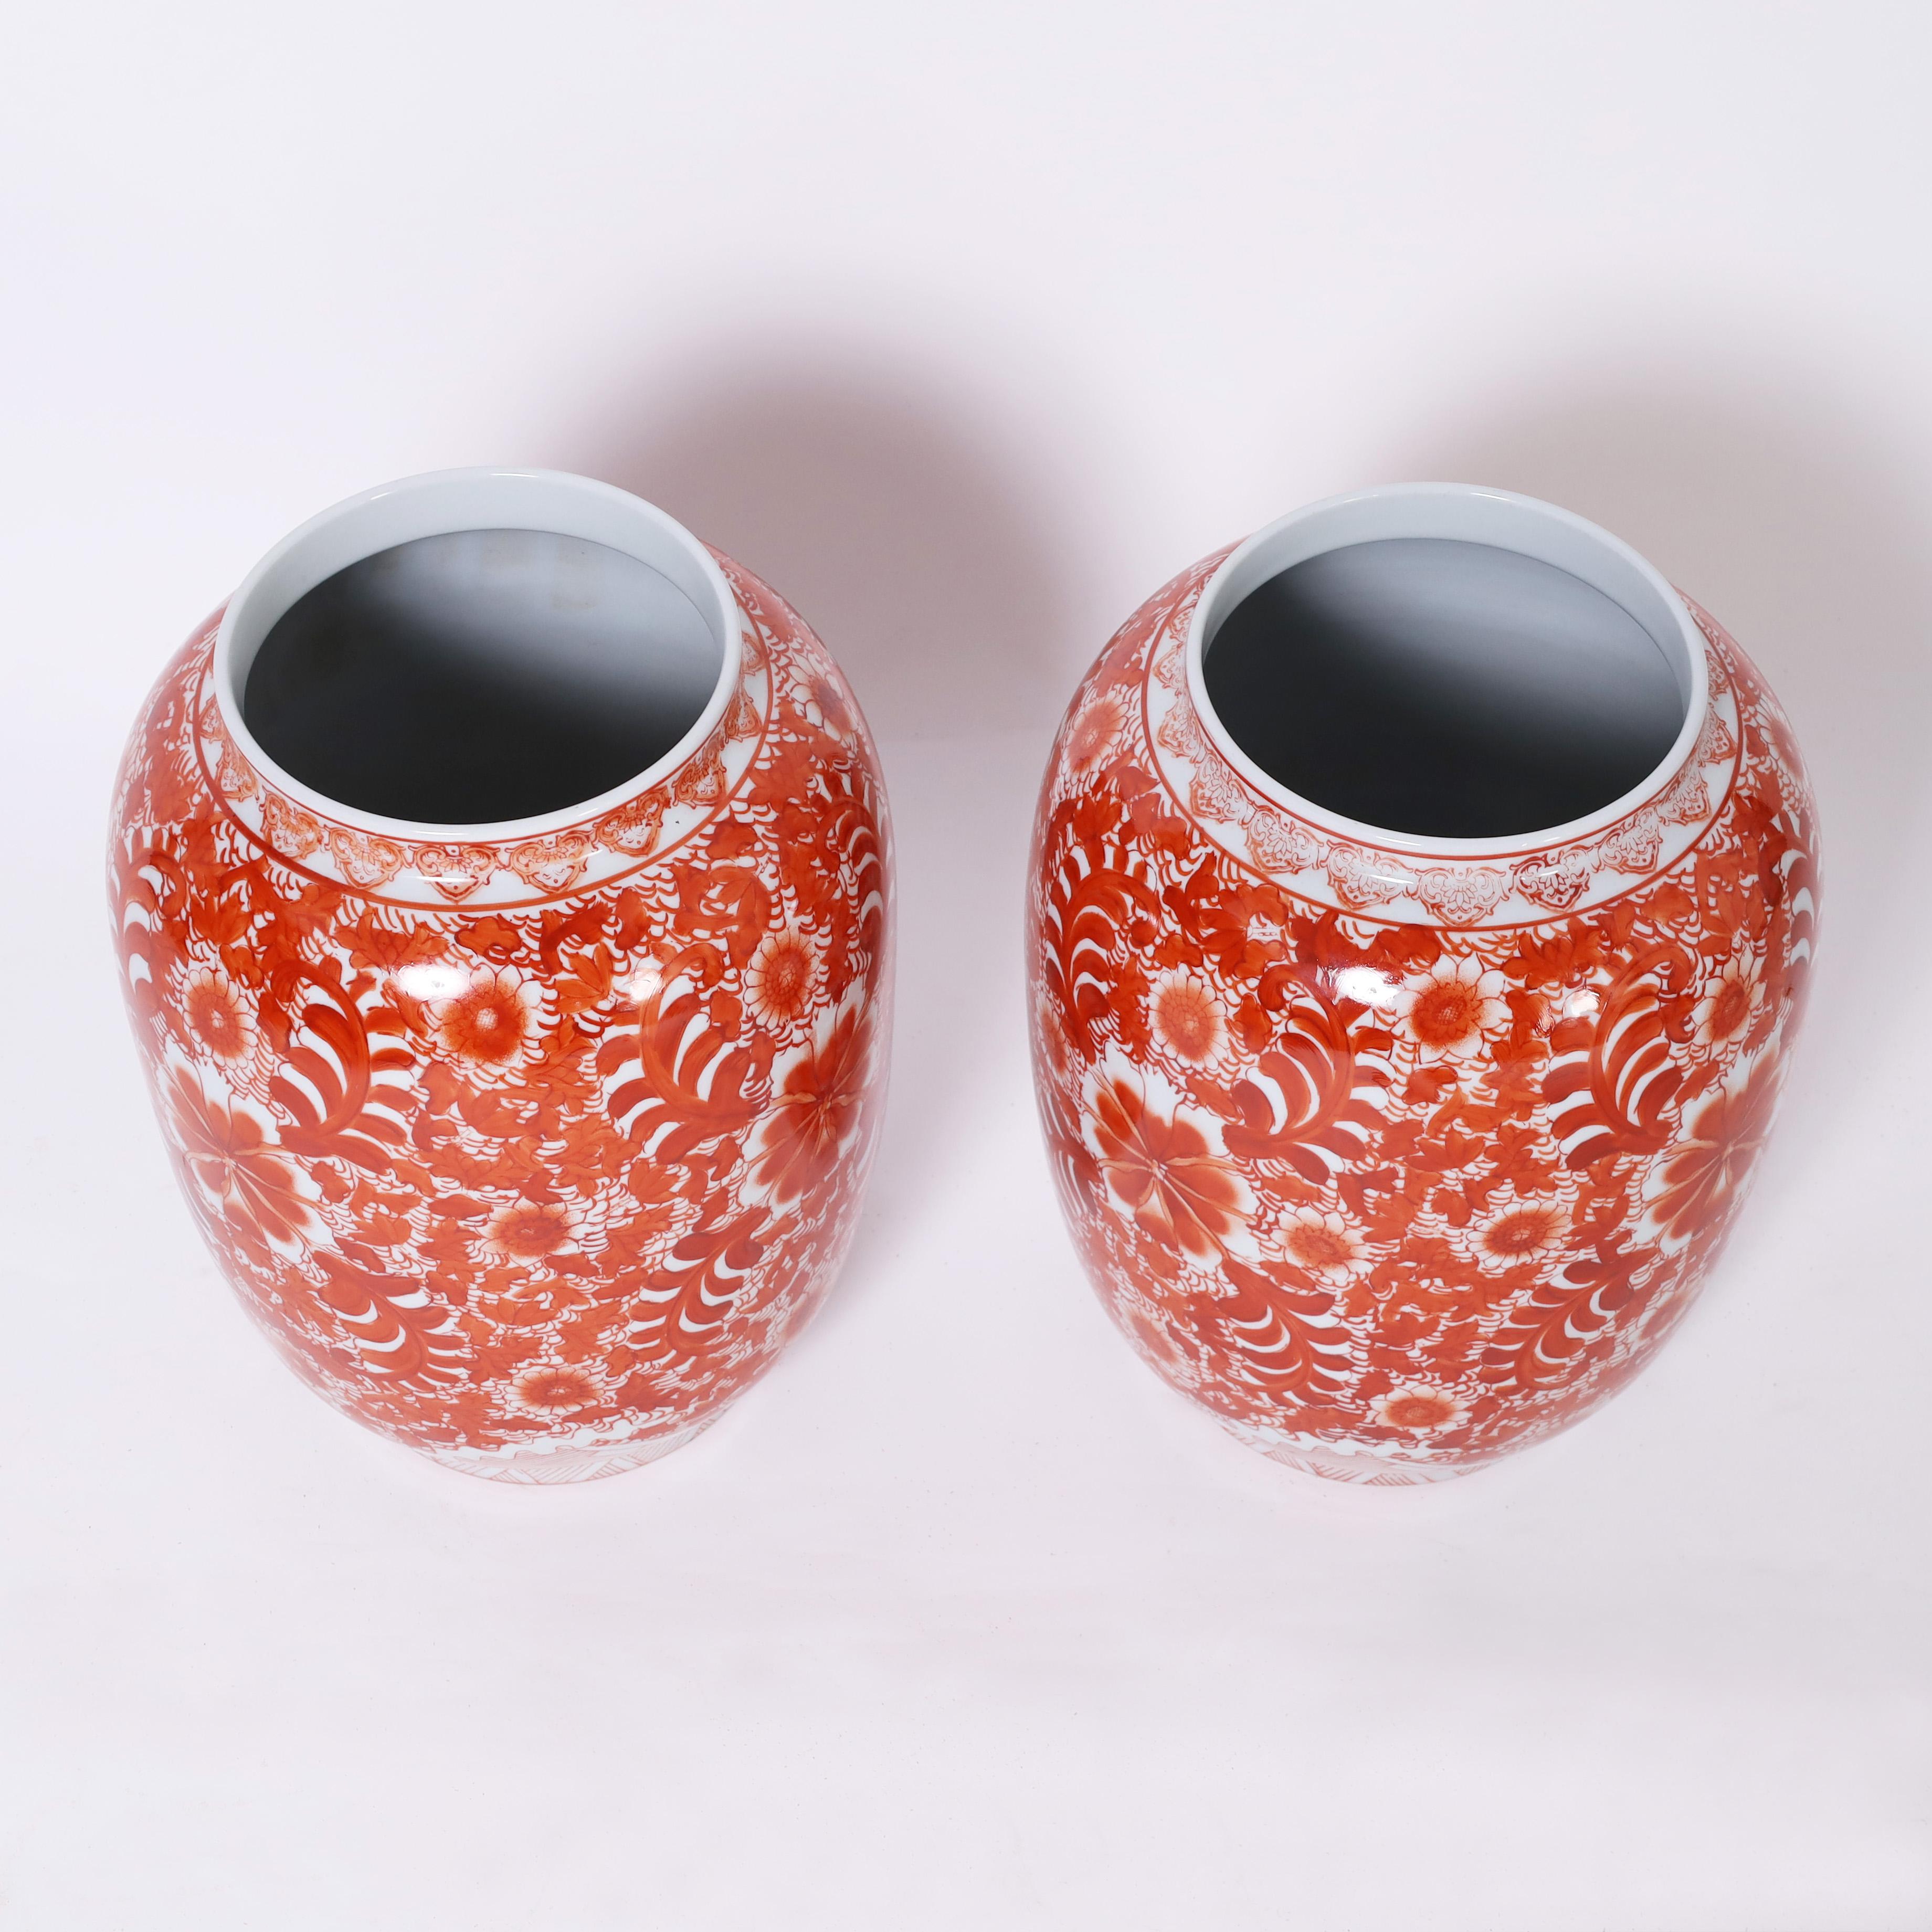 Enchanting pair of Chinese porcelain jars handcrafted in classic form and hand decorated in red and white floral designs.